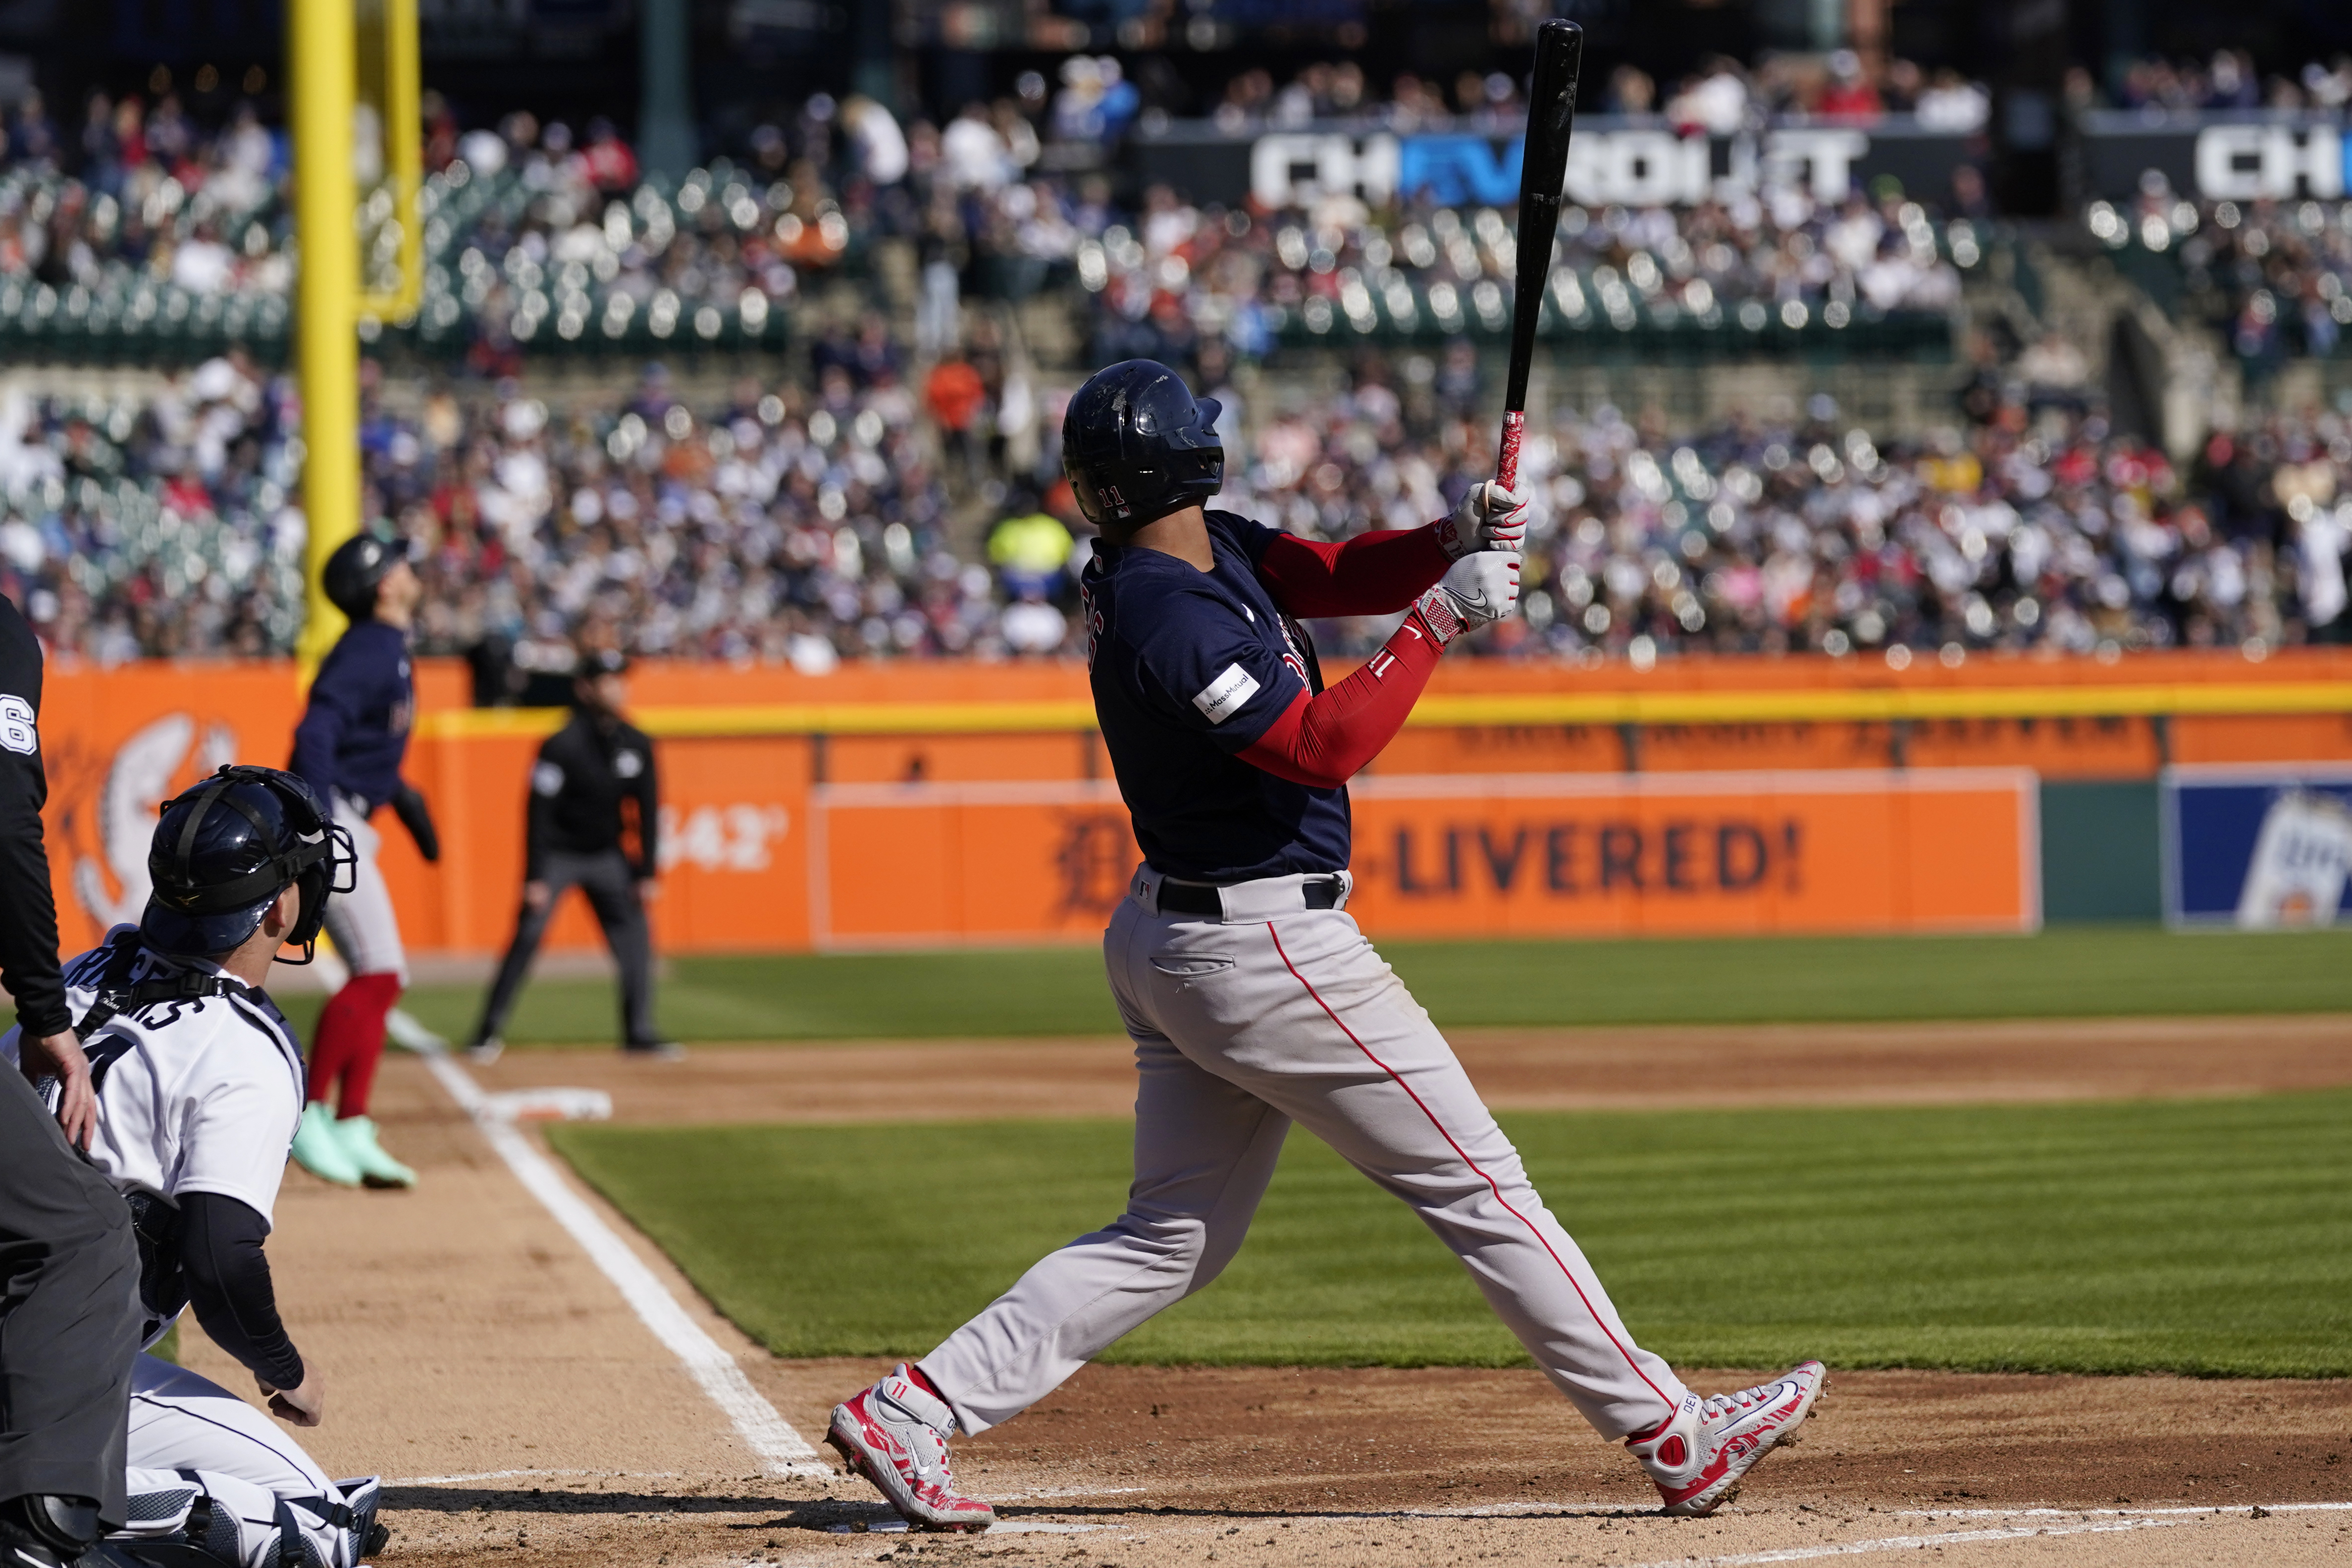 Boston Red Sox: Highlighting the hottest hitters at the plate - July edition